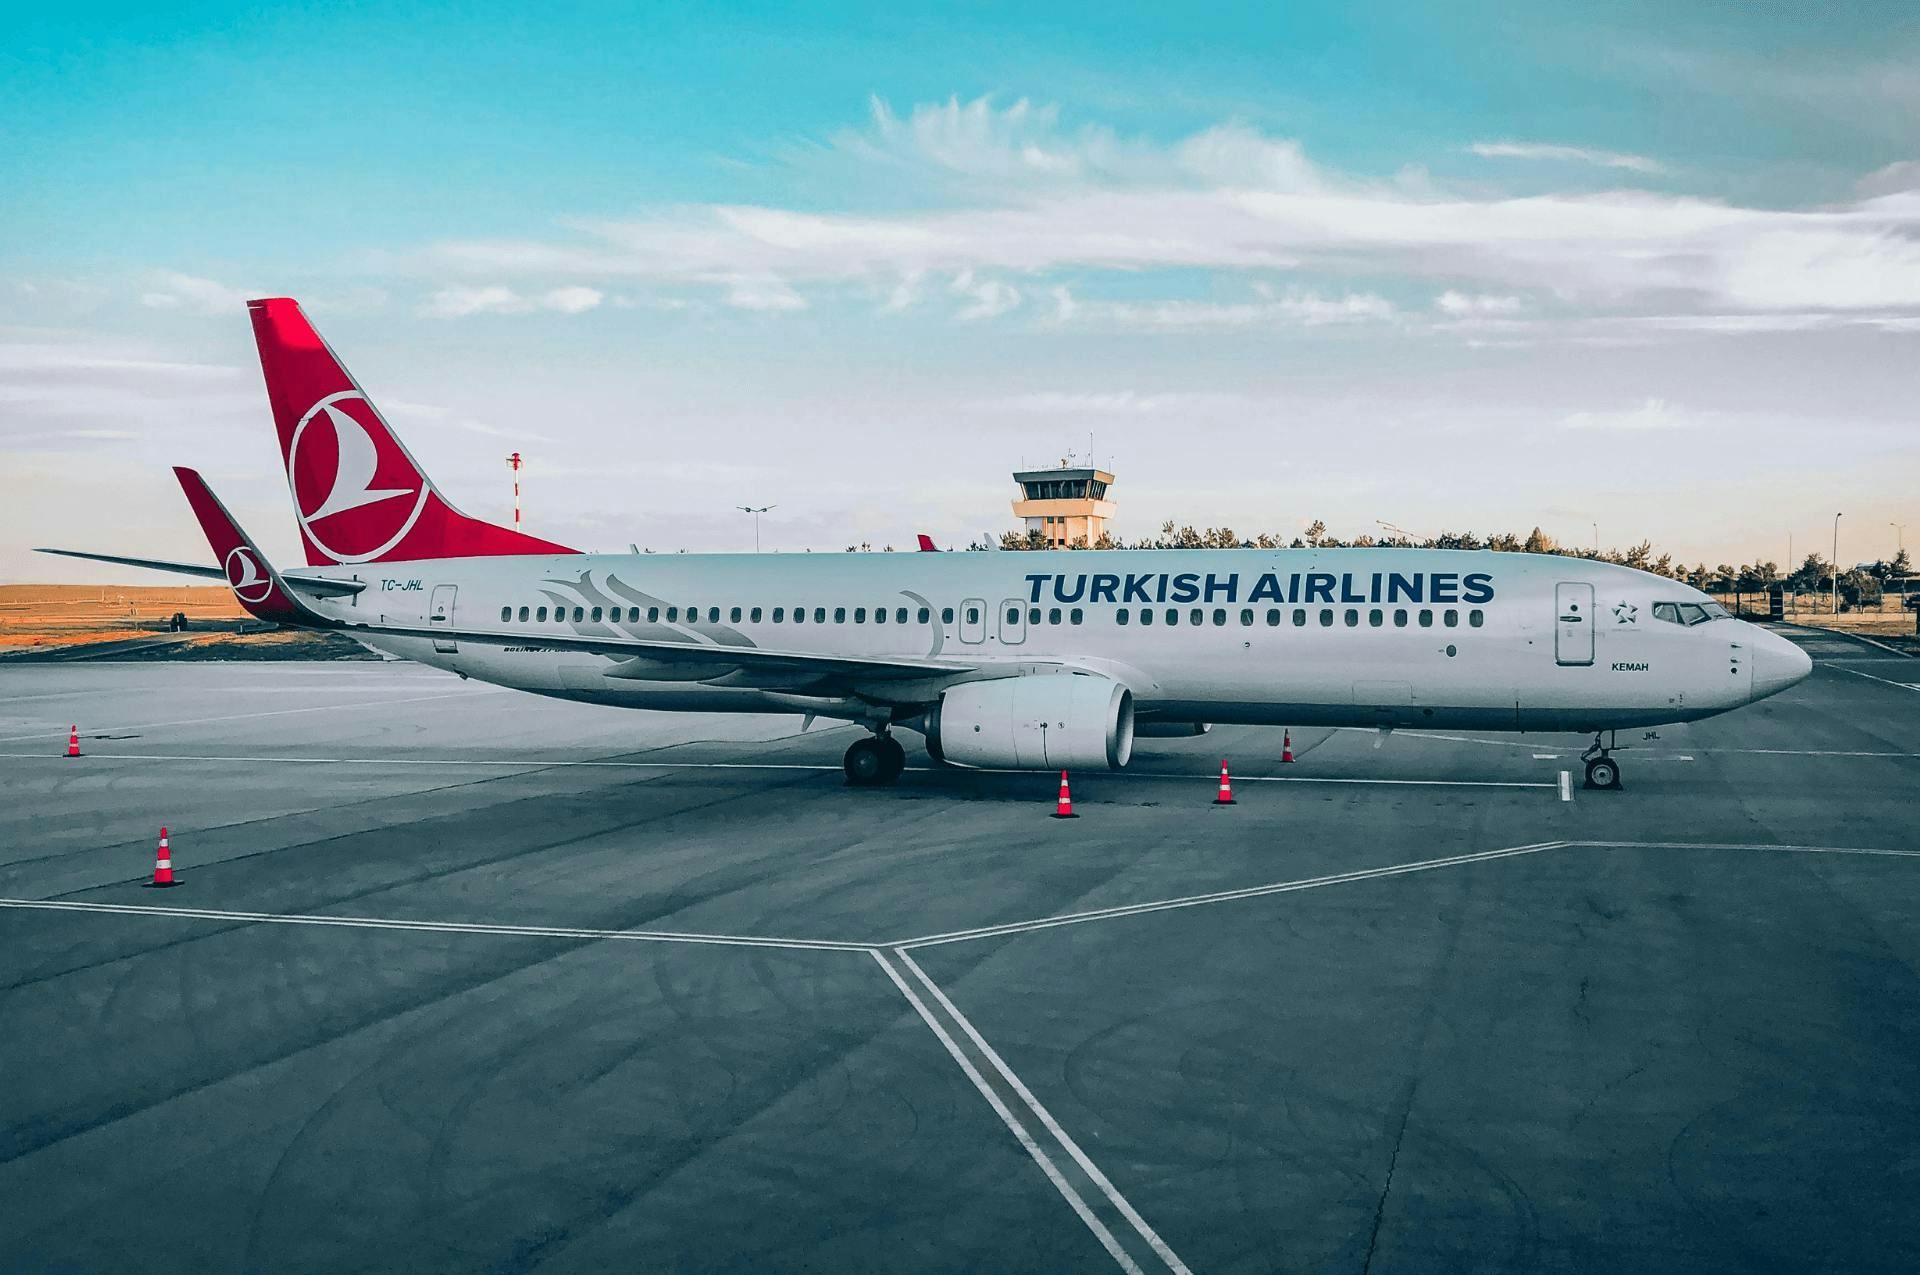 Turkish Airlines aircraft parked at airport